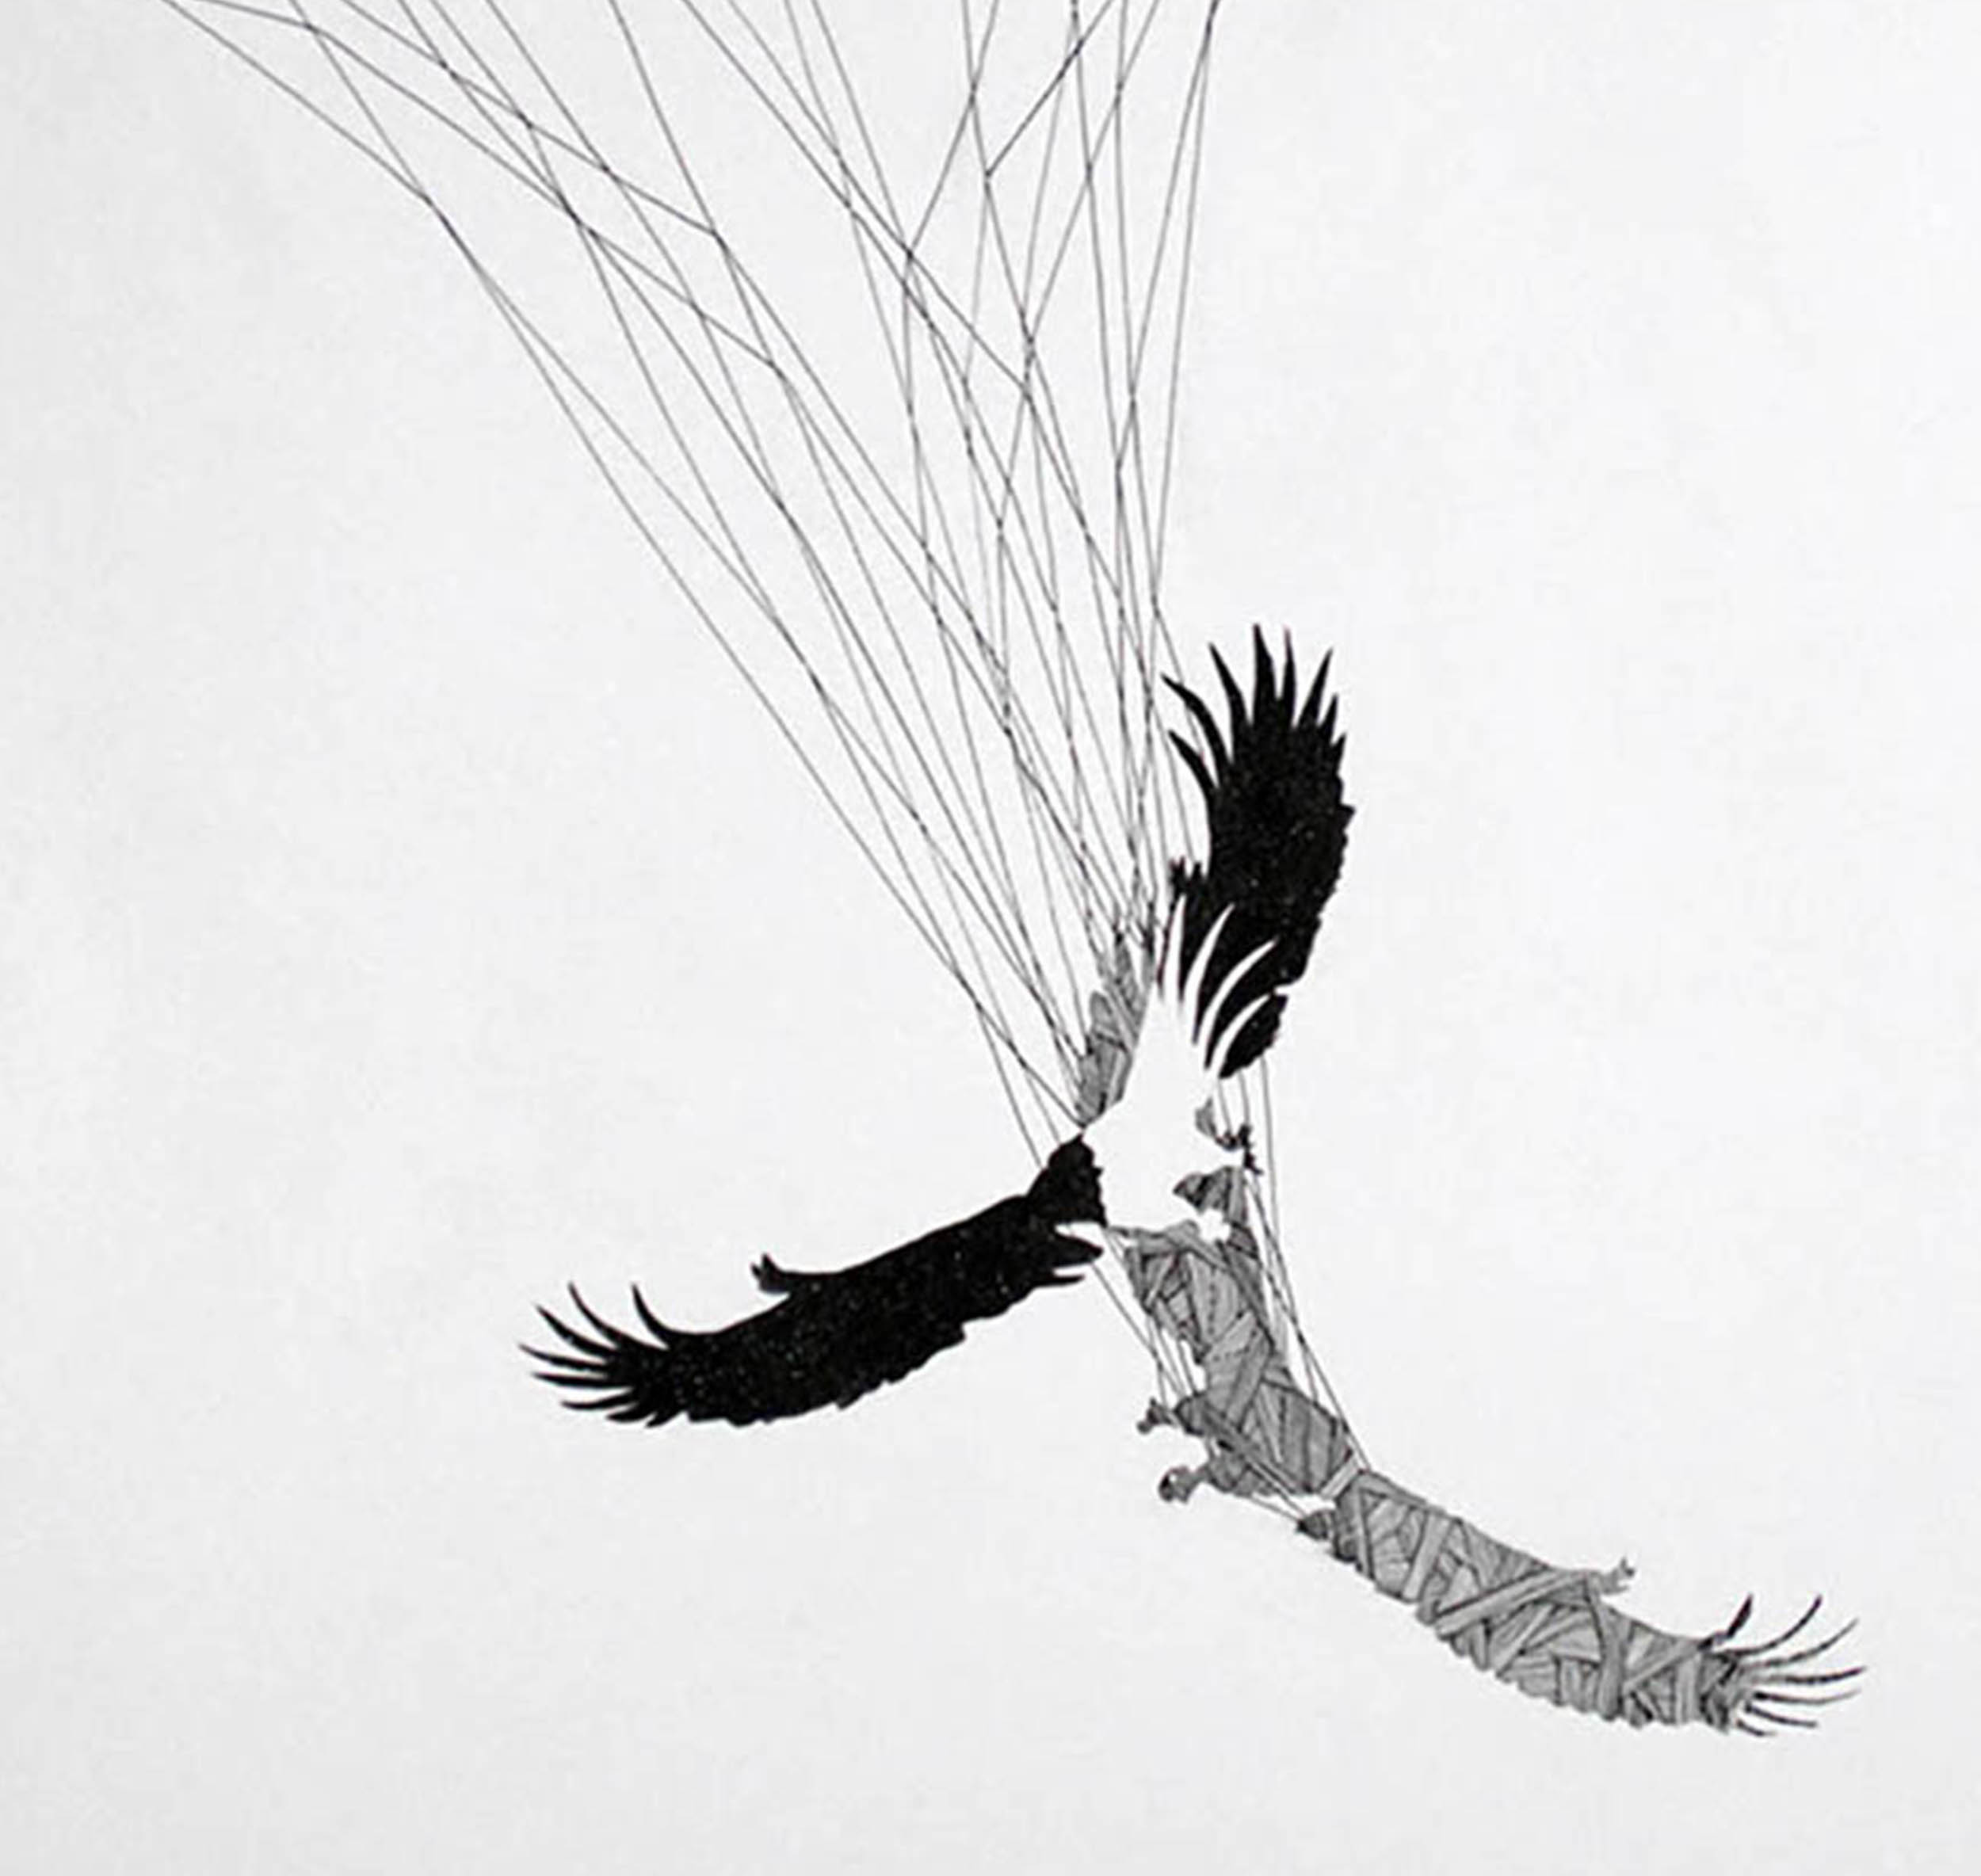 An artwork depicting two large birds of prey in black and white with strings from their wings.